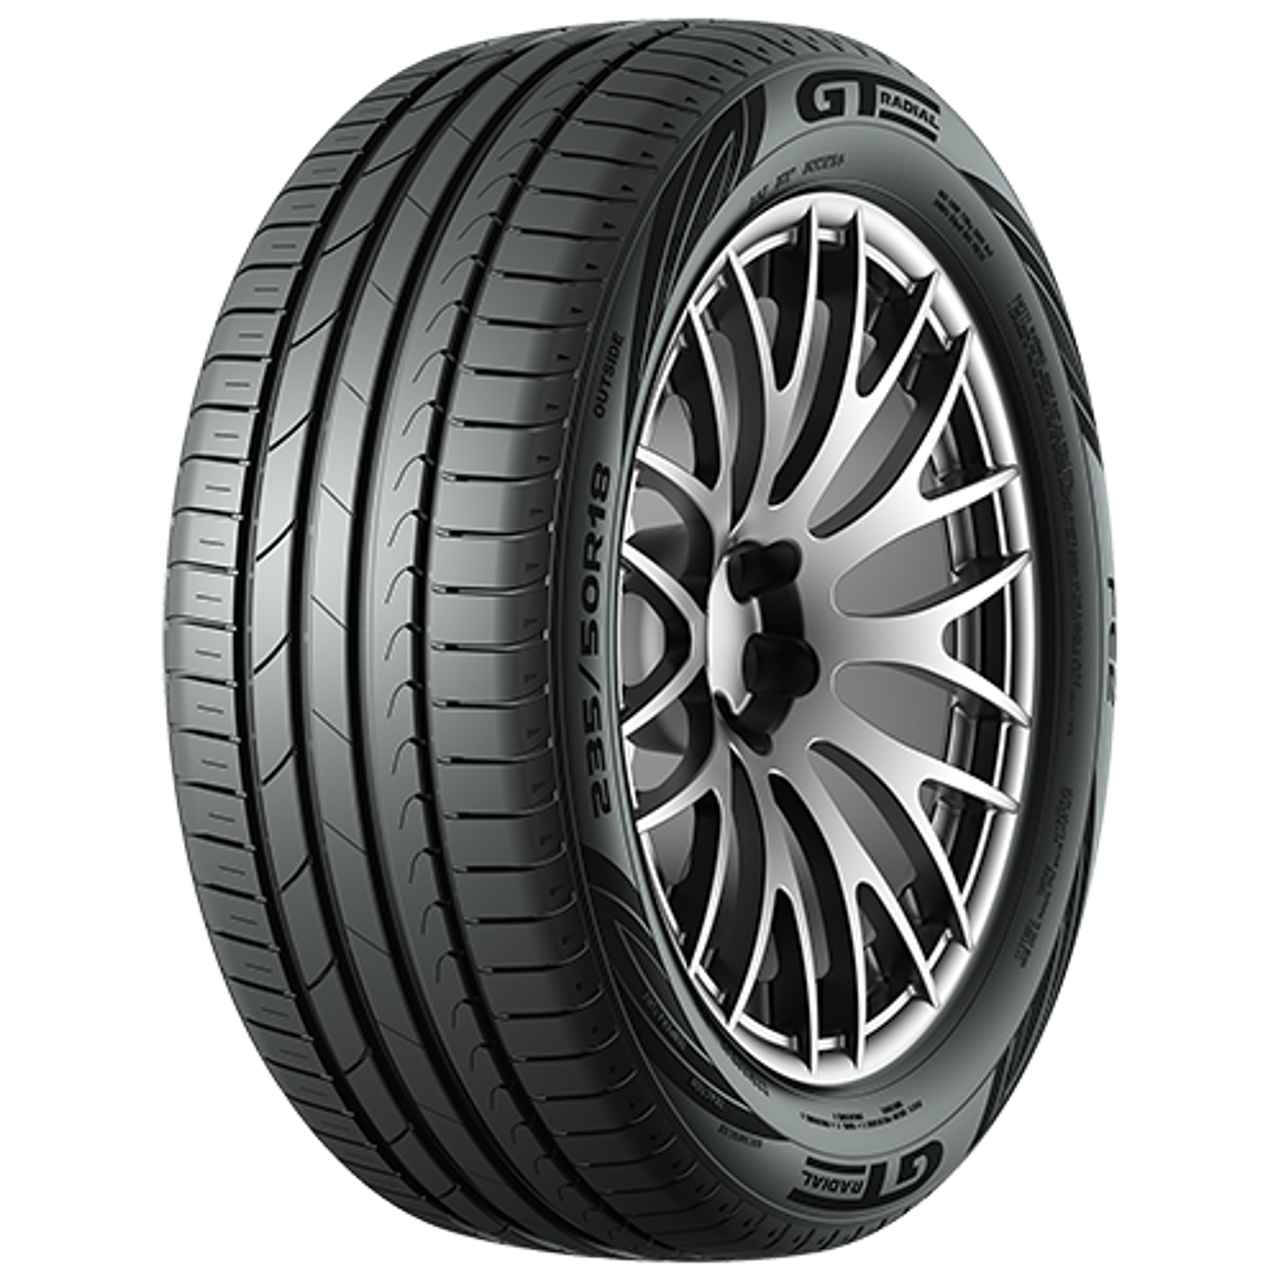 GT-RADIAL FE2 195/55R16 87H BSW